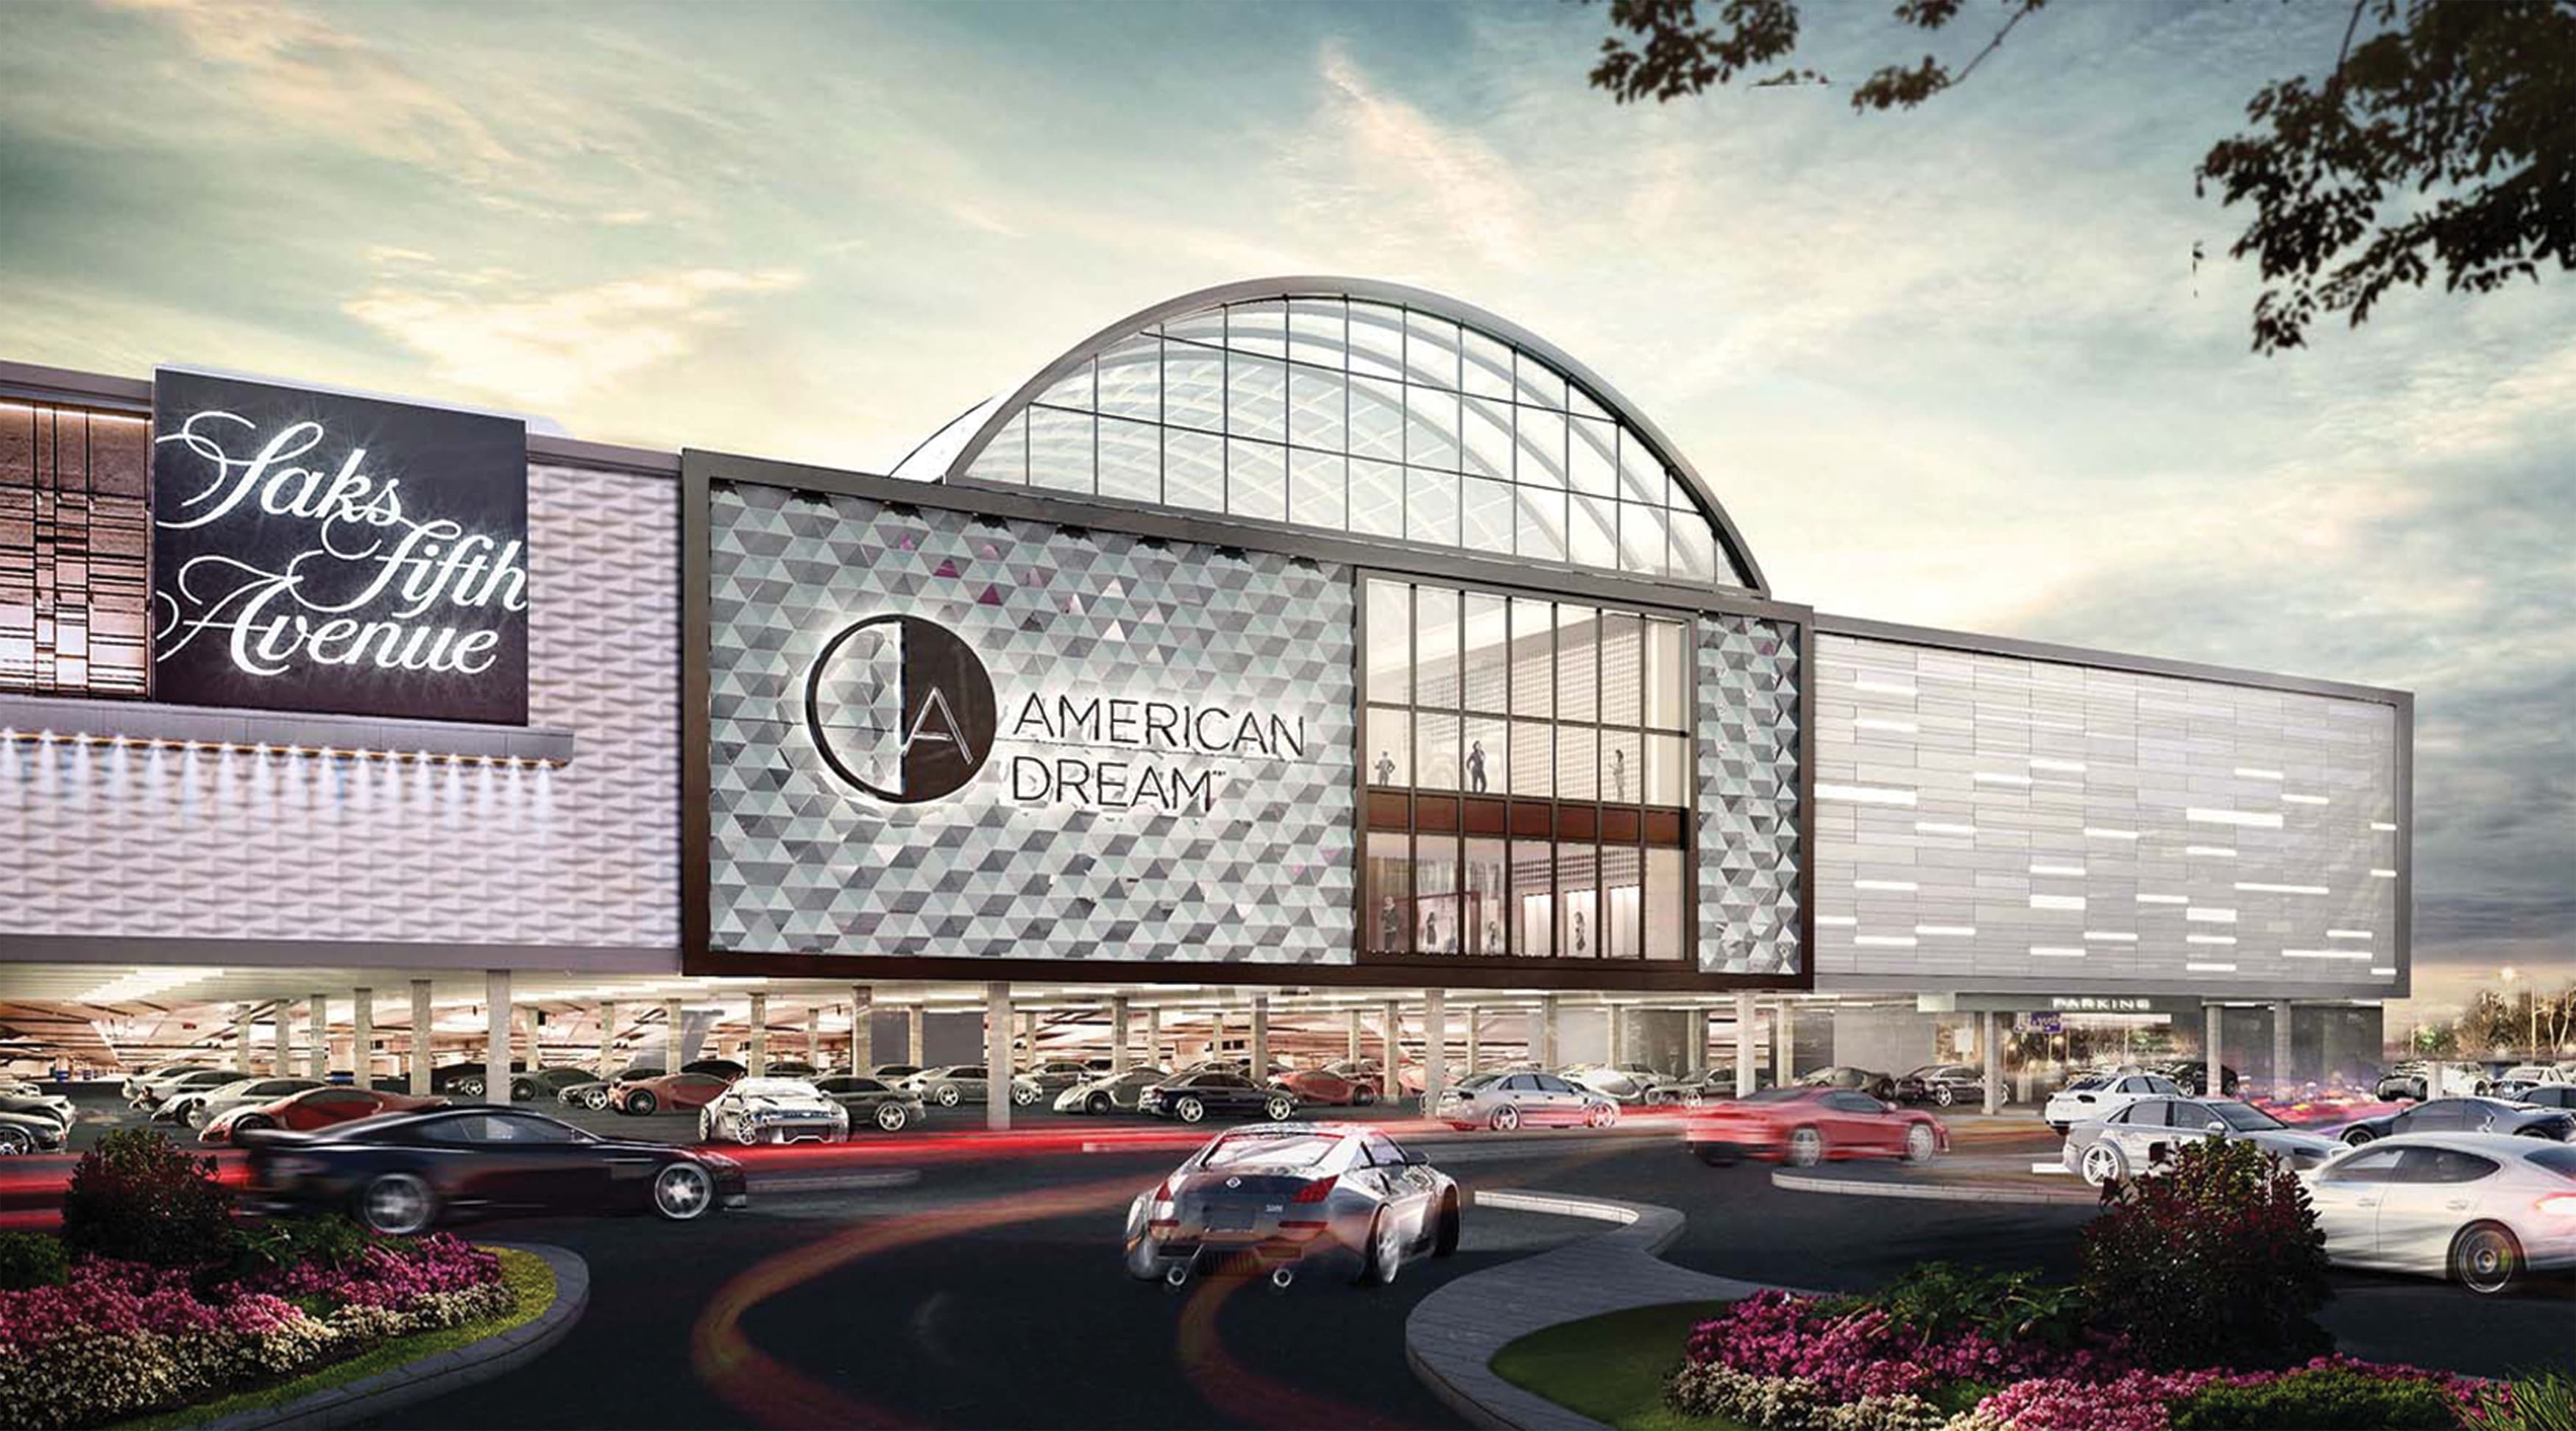 American Dream Retail Project Design in East Rutherford, New Jersey. Architectural Rendering and Architectural Facade Project Identity